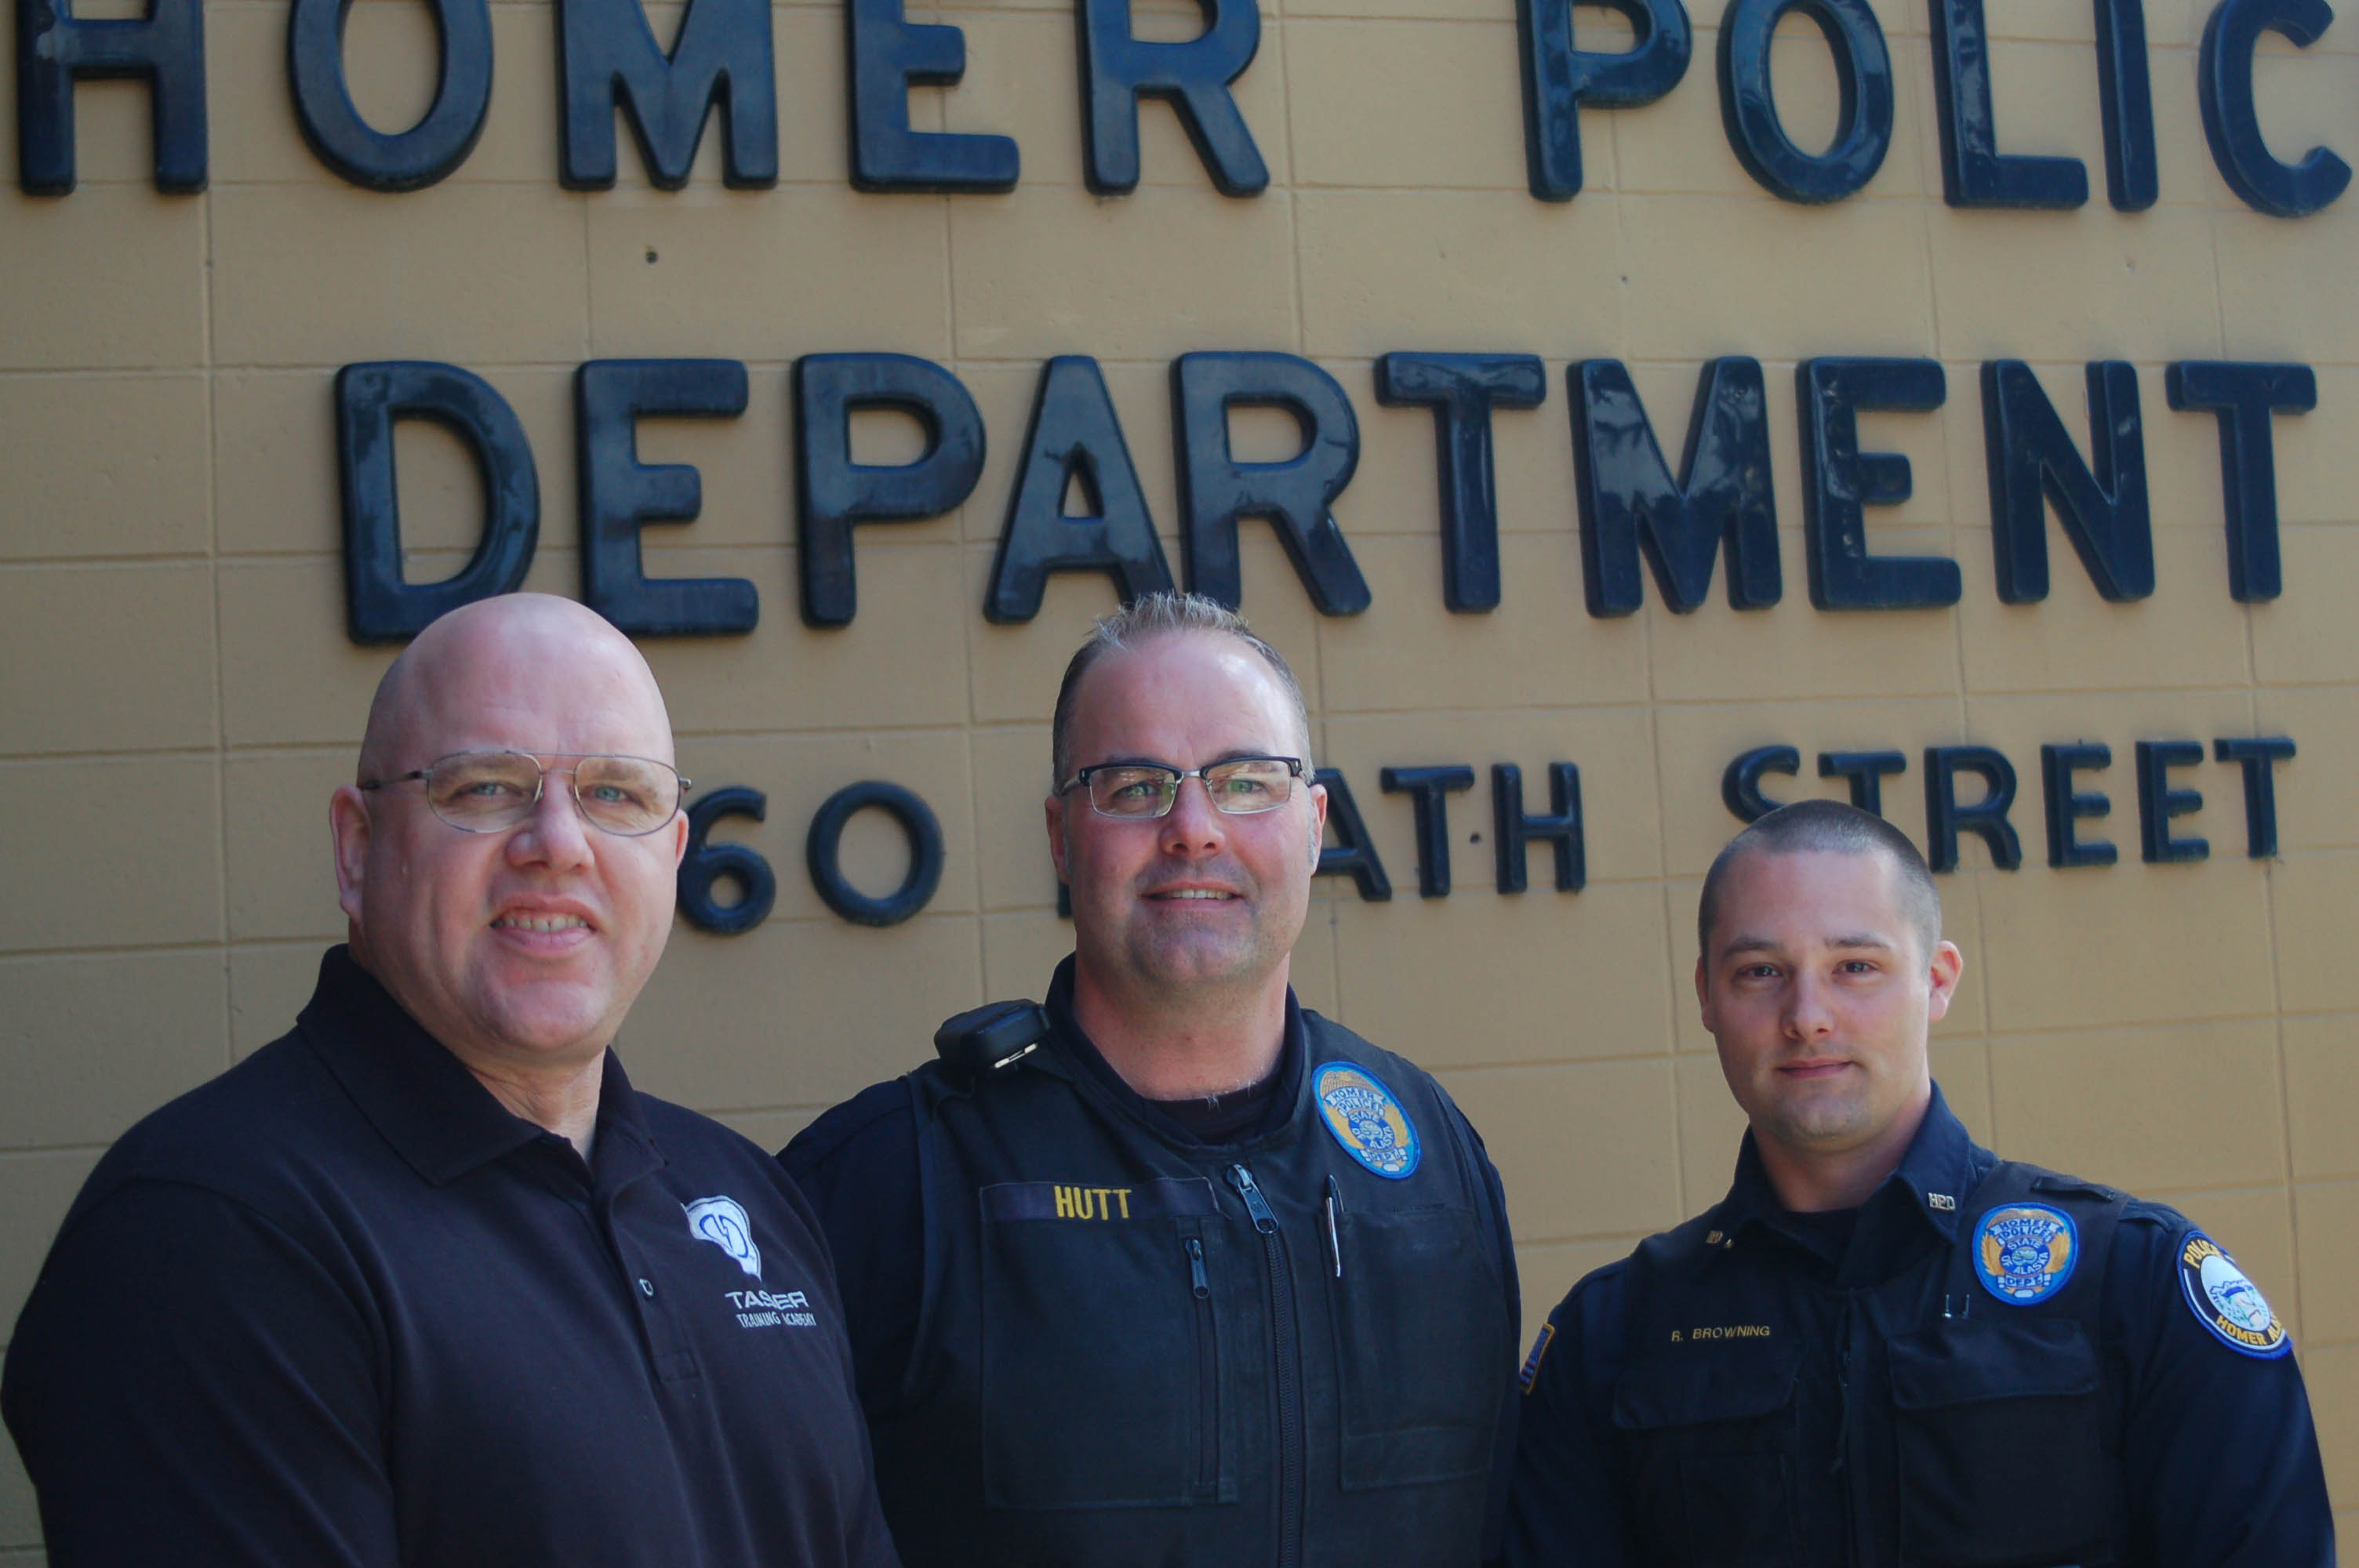 Lt. Randy Rosencrans, left, Lt. Will Hutt and Sgt. Ryan Browning pose in front of the Homer Police Station late last month. Rosencrans retired May 31 as the second-in-command of the police department, and Hutt was promoted from sergeant to lieutenant to take over. Browning was promoted from officer to sergeant to fill the vacancy created by Hutt’s promotion.